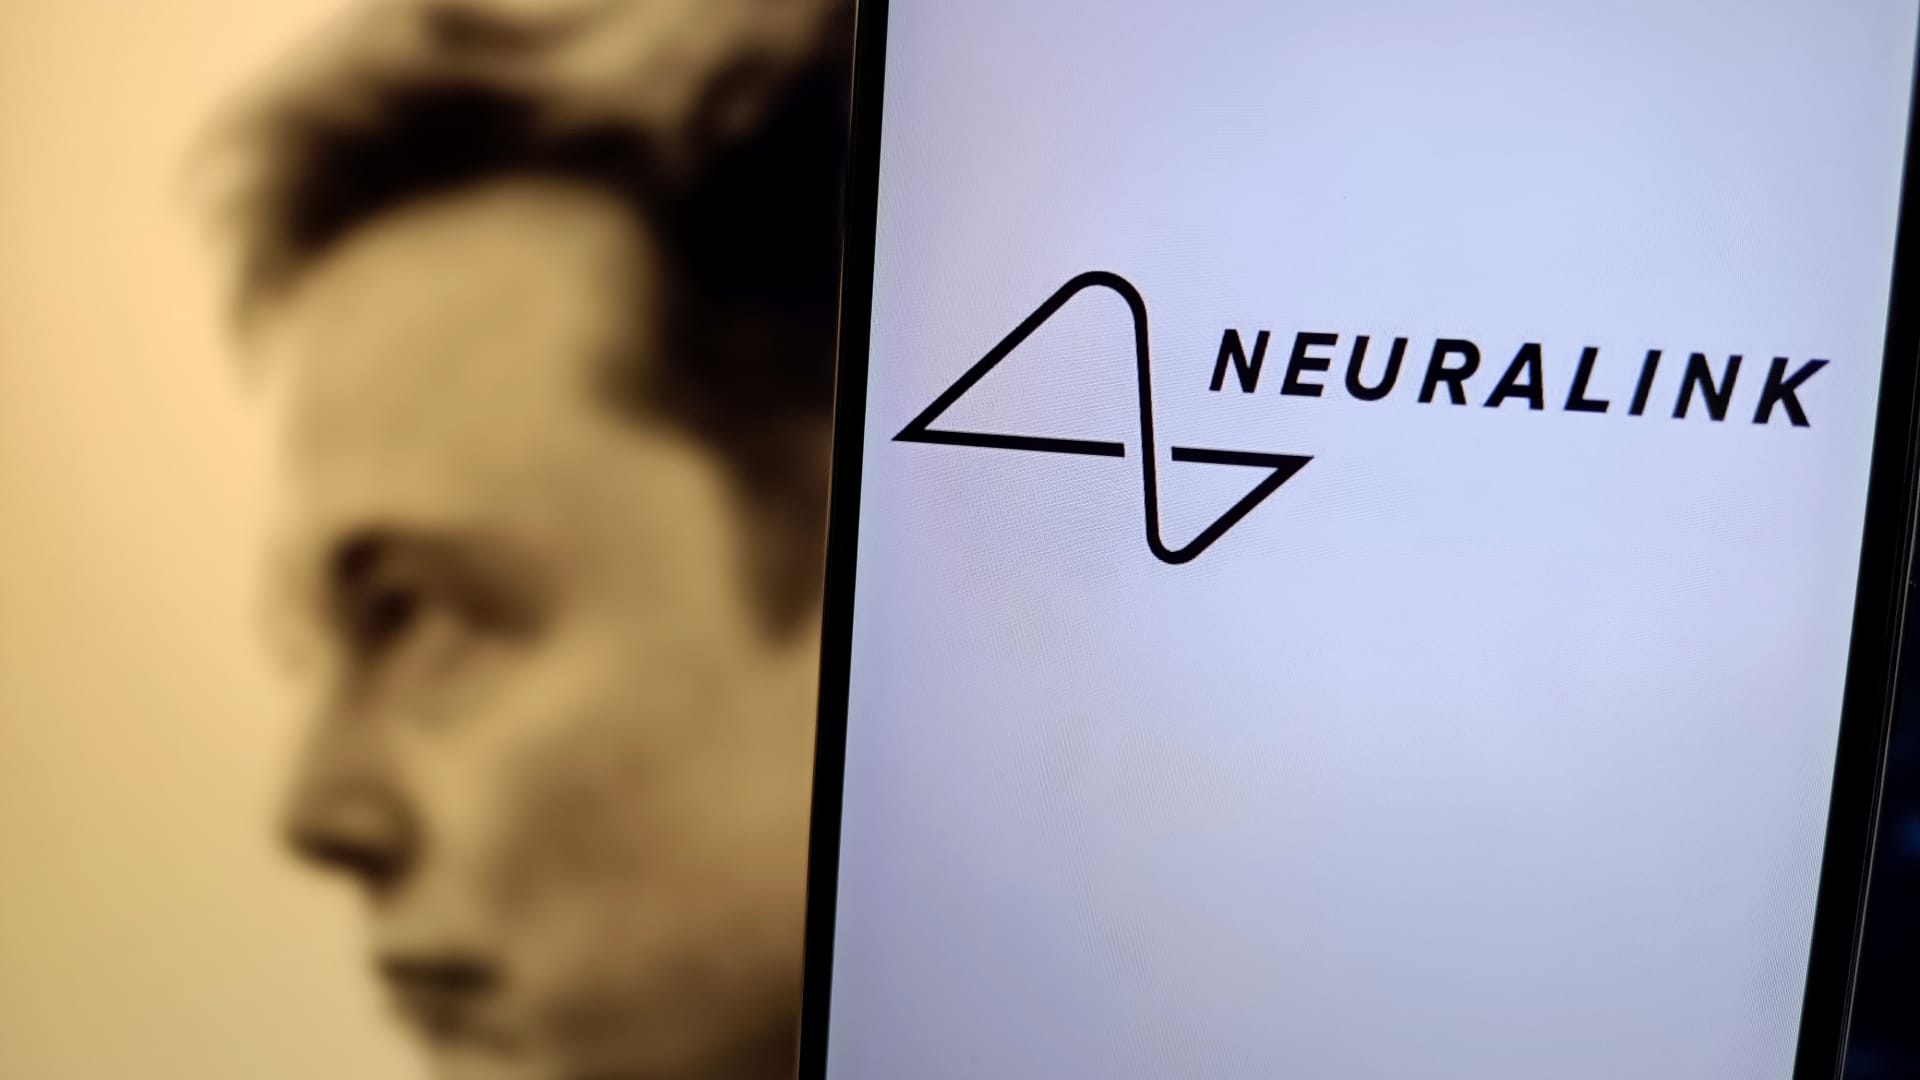 Elon Musk’s Neuralink is recruiting patients for its first human trial